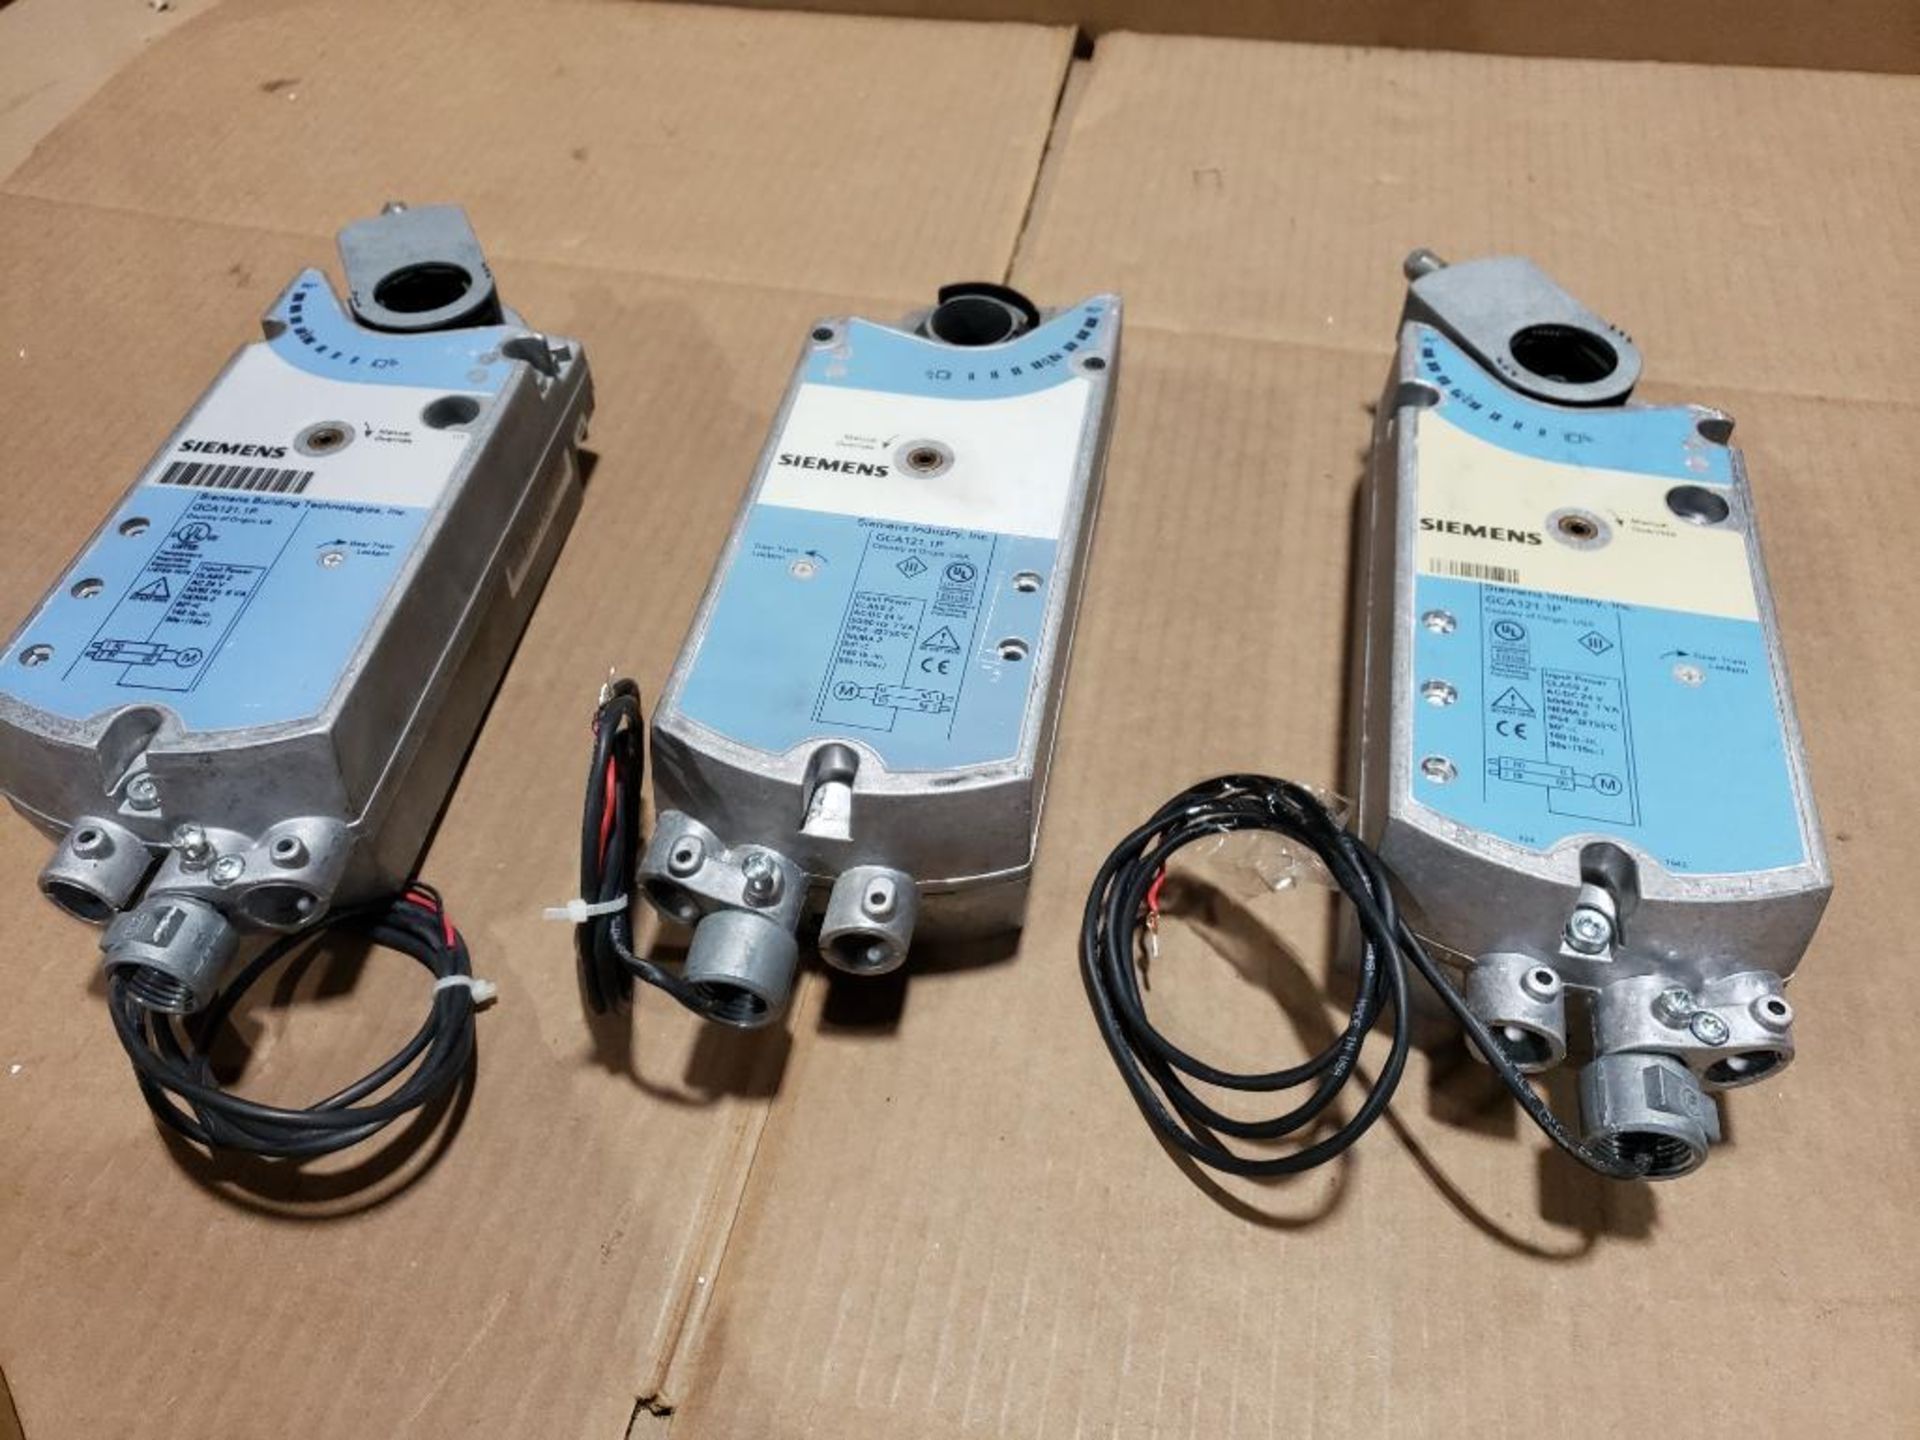 Qty 3 - Siemens actuator. Part number GCA121-1P. - Image 5 of 6